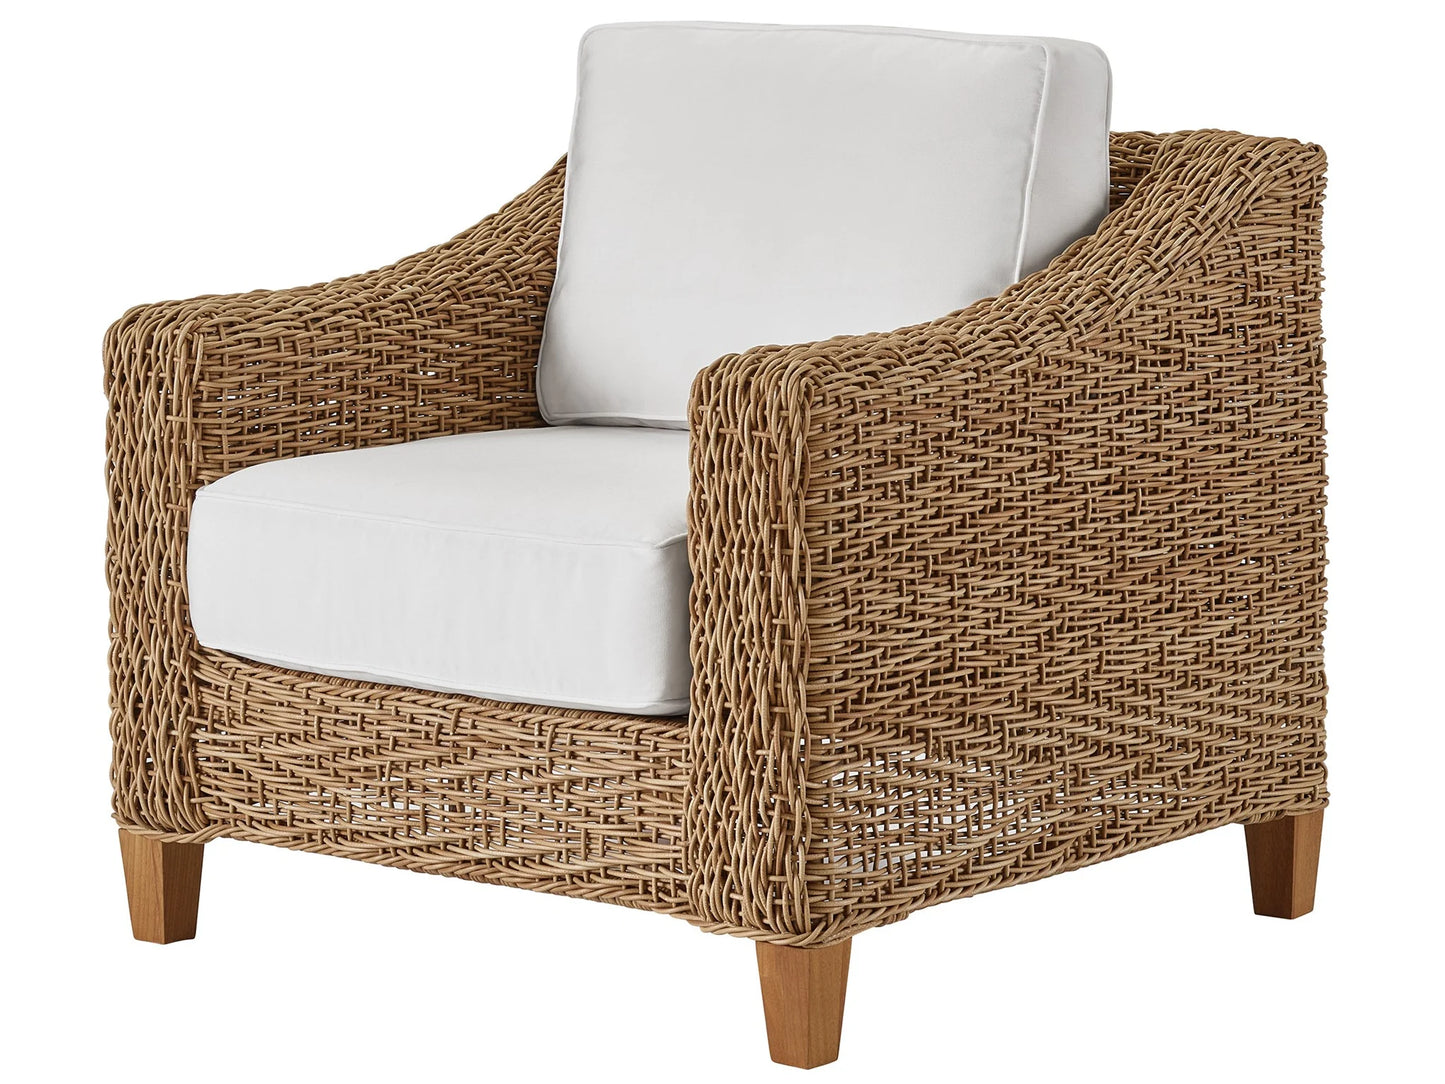 UNIVERSAL - COASTAL LIVING OUTDOOR LACONIA LOUNGE CHAIR